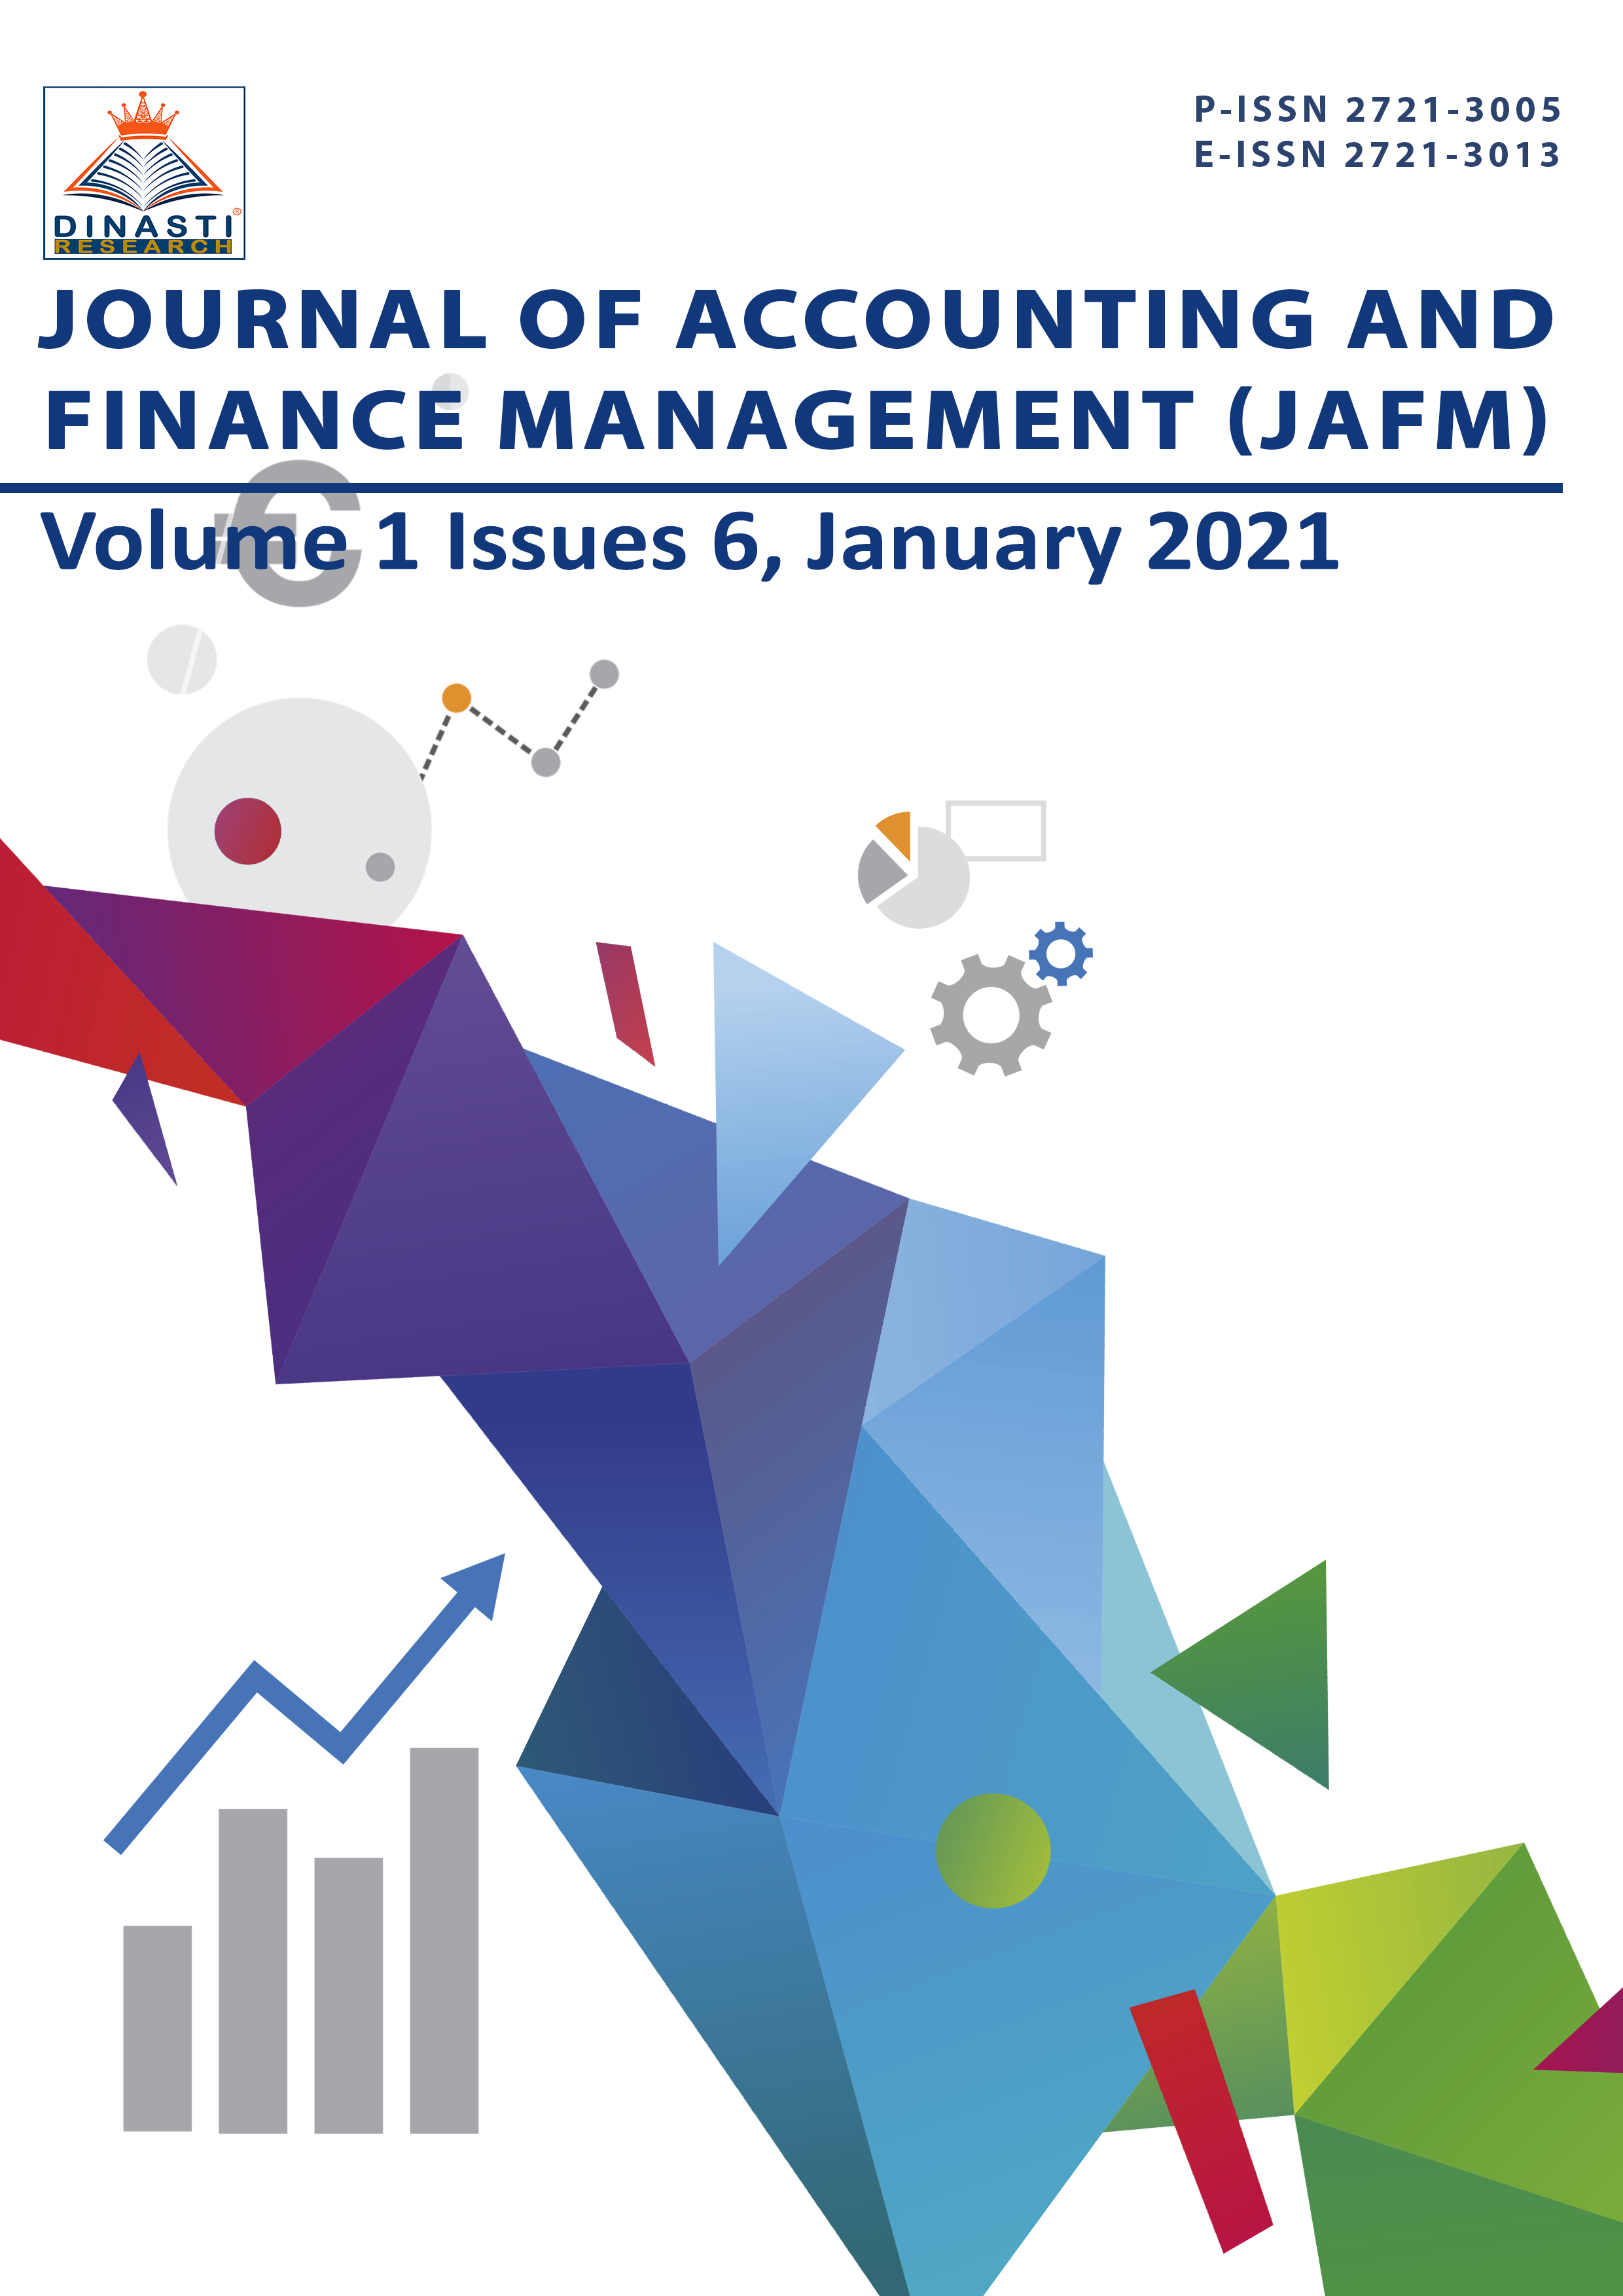 					View Vol. 1 No. 6 (2021): Journal of Accounting and Finance Management (January-February 2021)
				